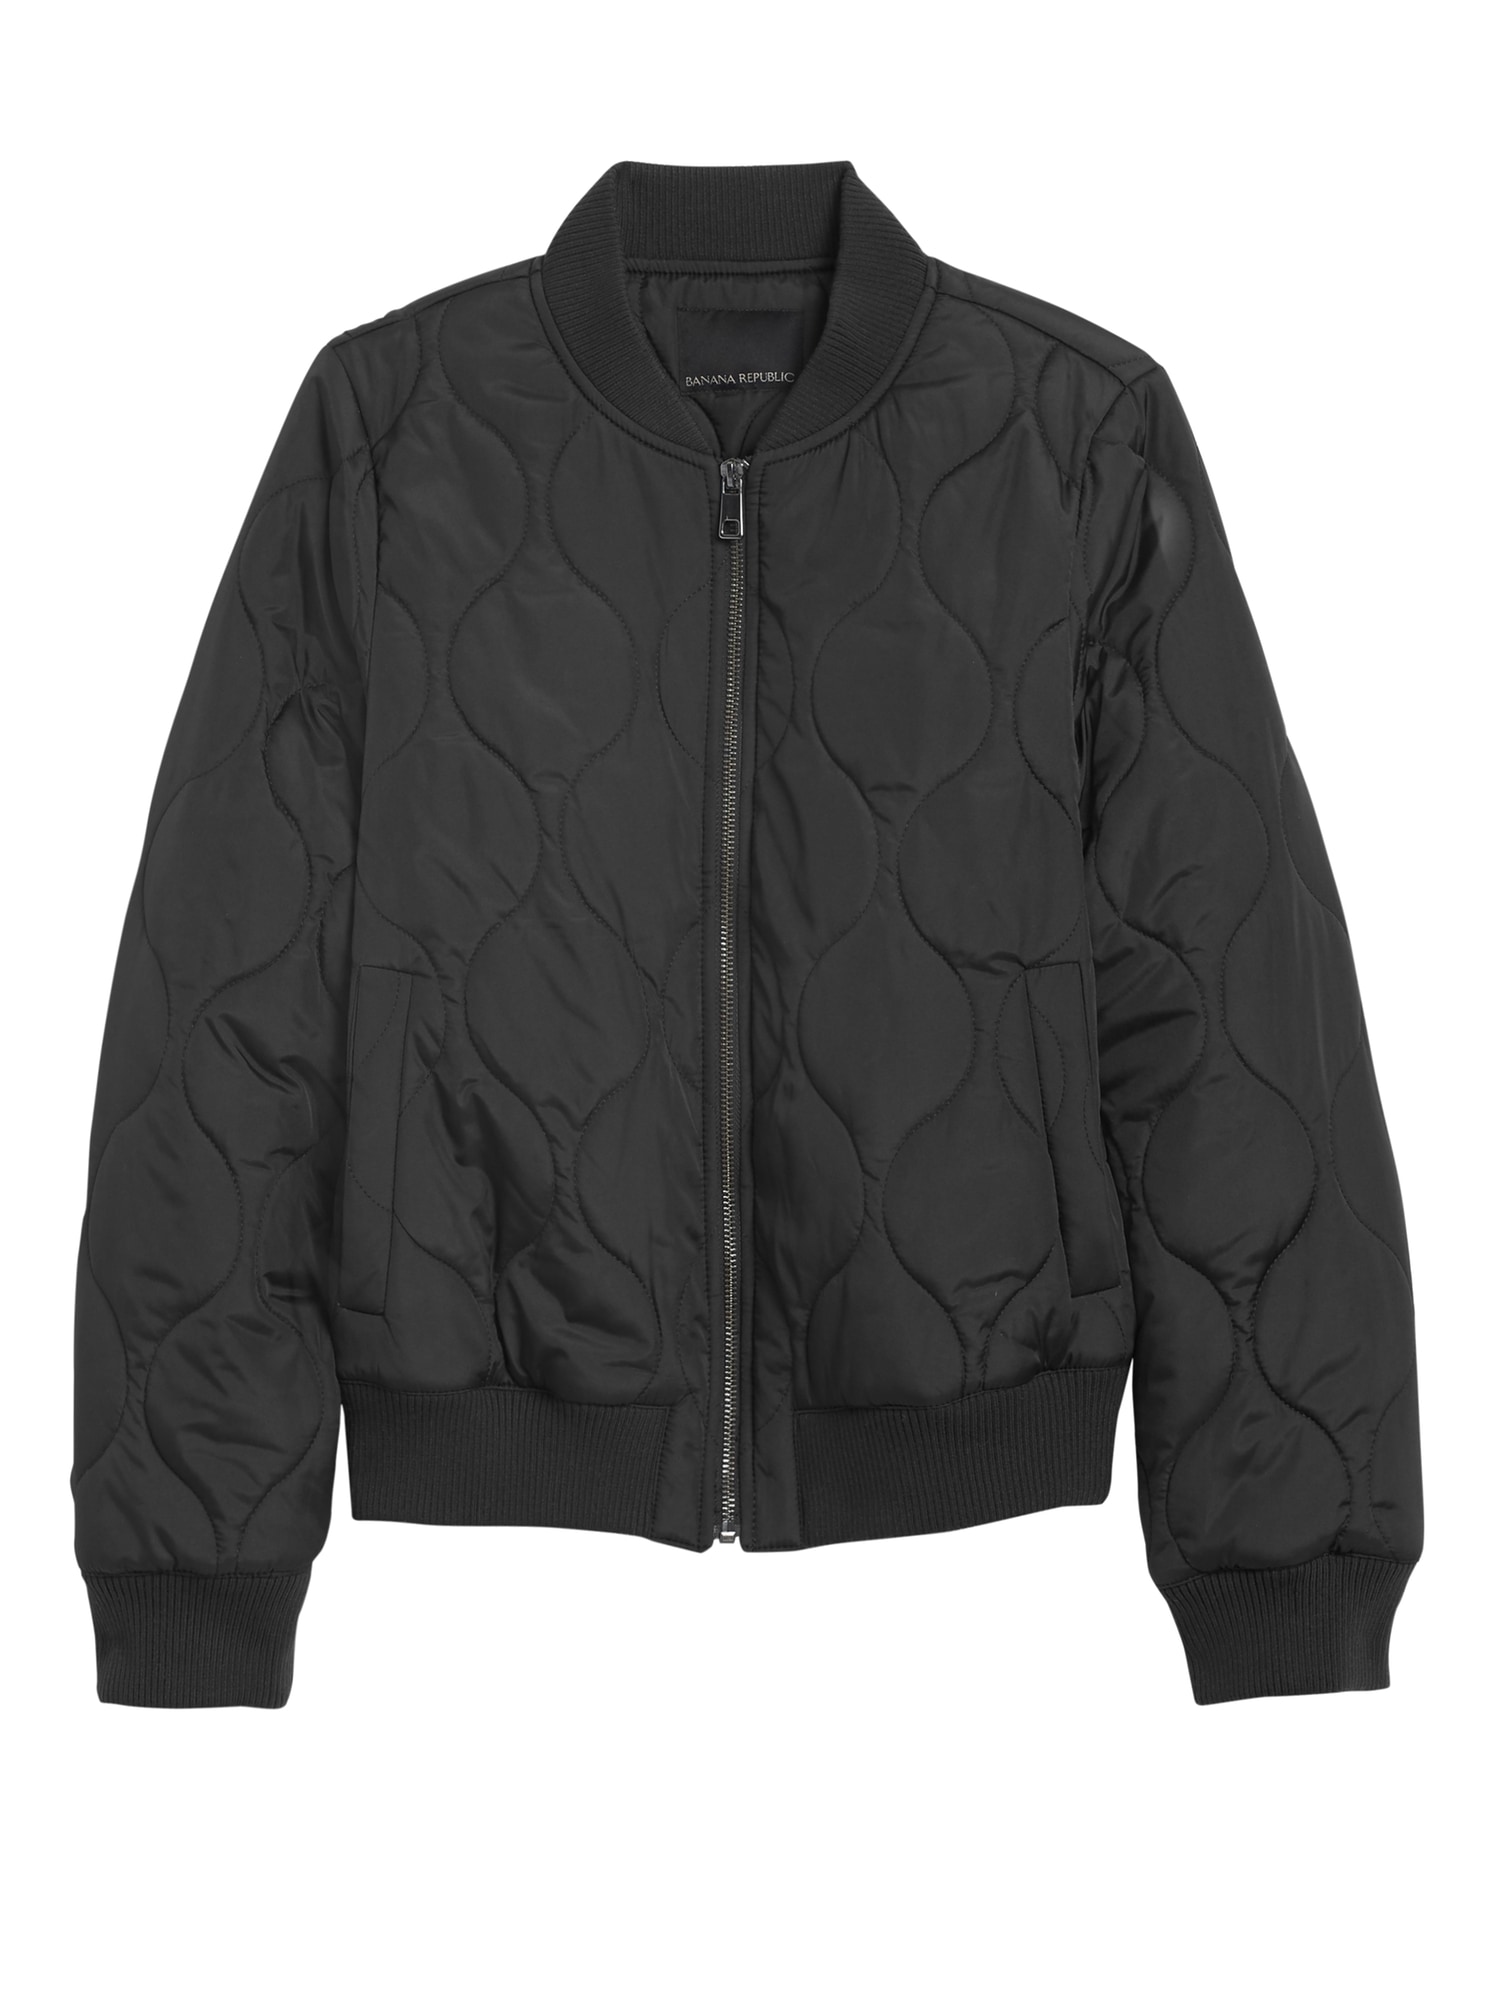 Banana Republic Quilted Faux Leather Mini, $89